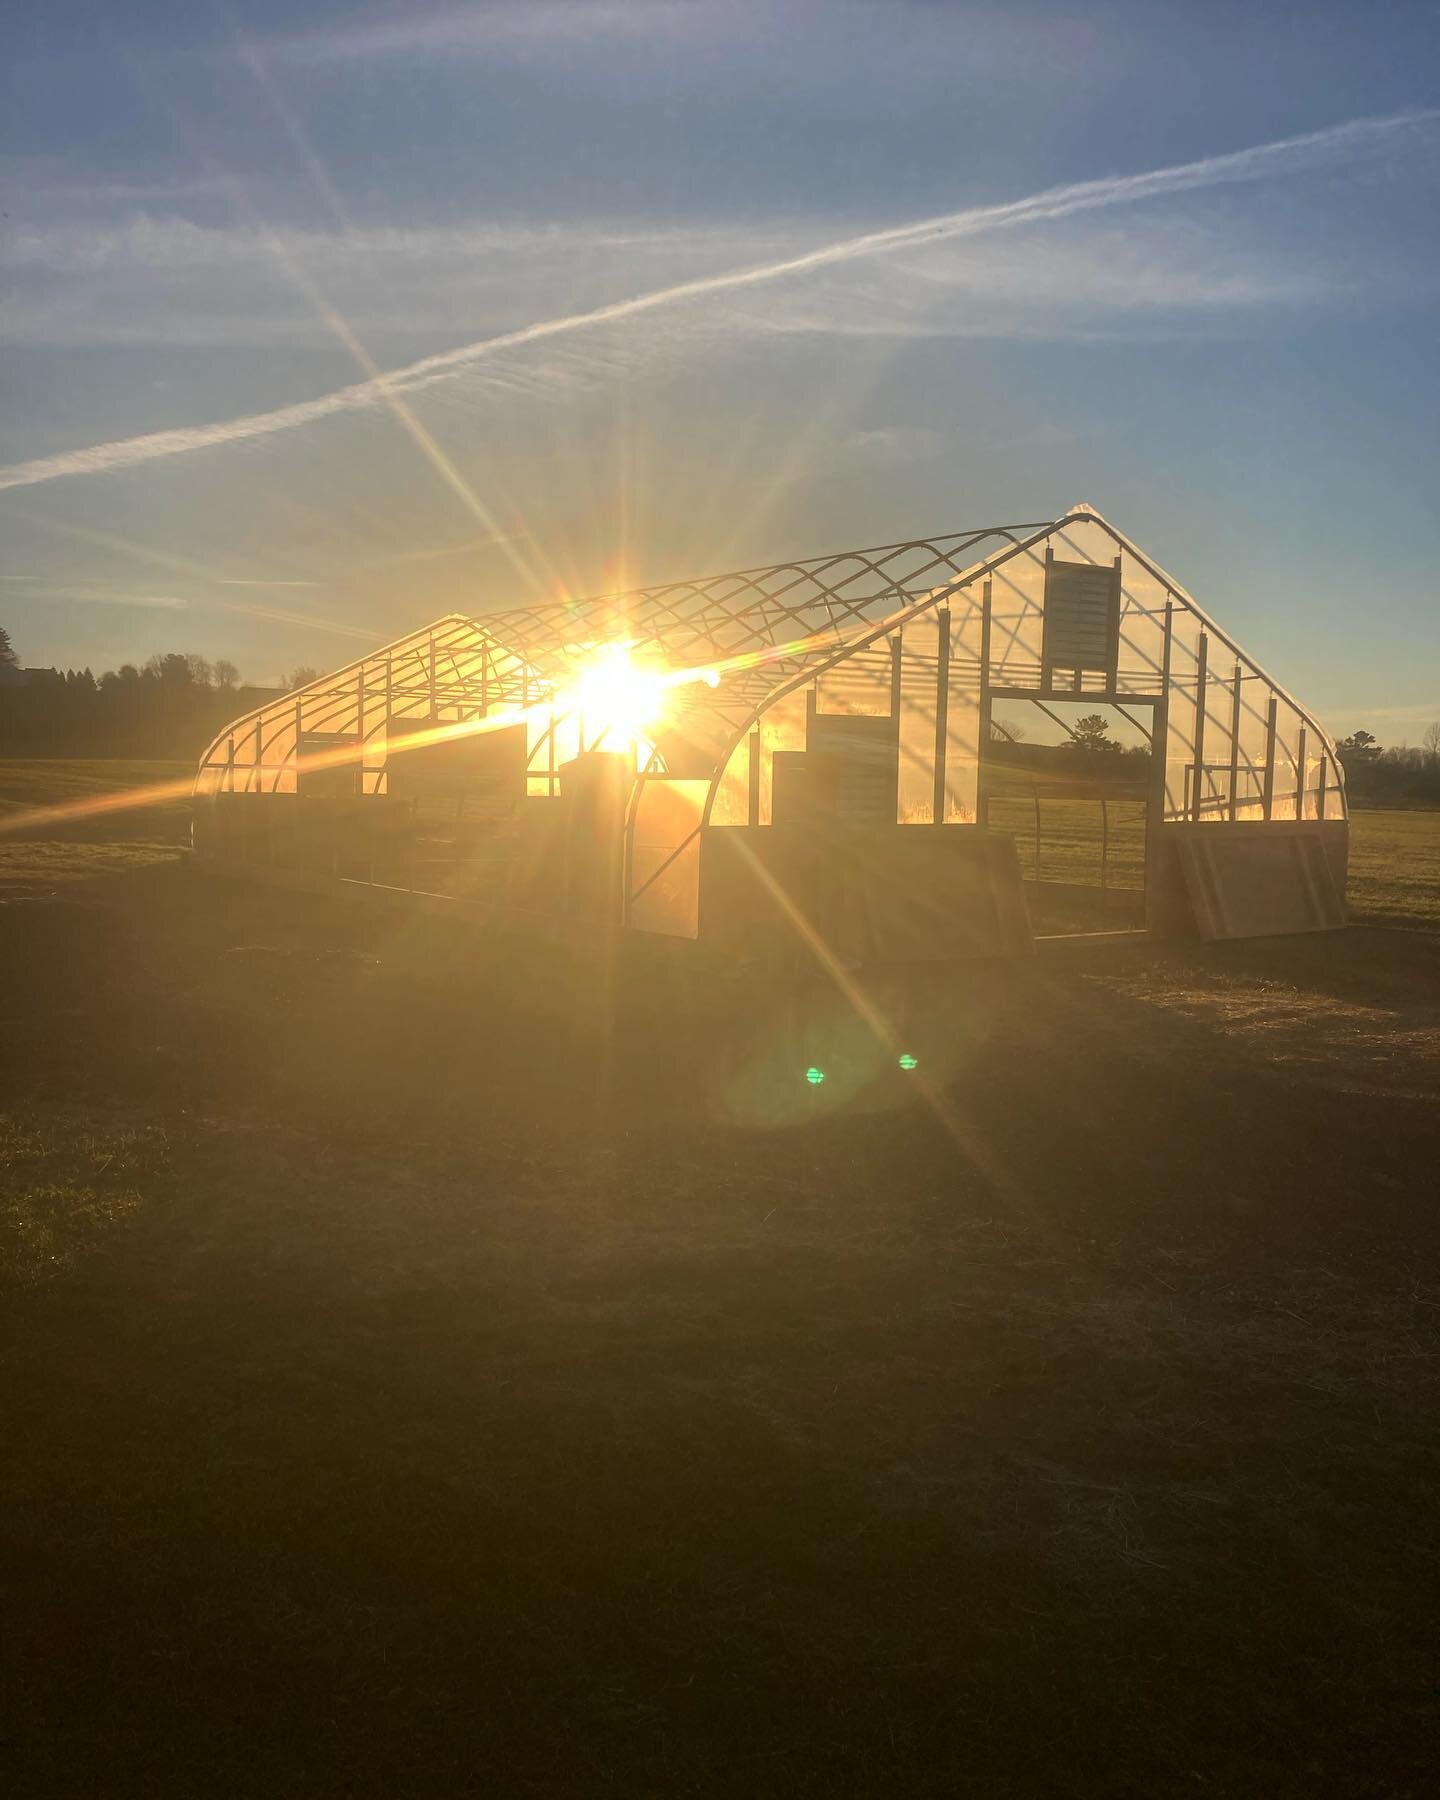 We are bouncing all over the place trying to wrap up the season! Today we took a big run at closing out three new houses @headoverfieldsvermont with this stellar sunrise poly of the new prop house!! 🌱☀️ One more day to get the doors on the other two